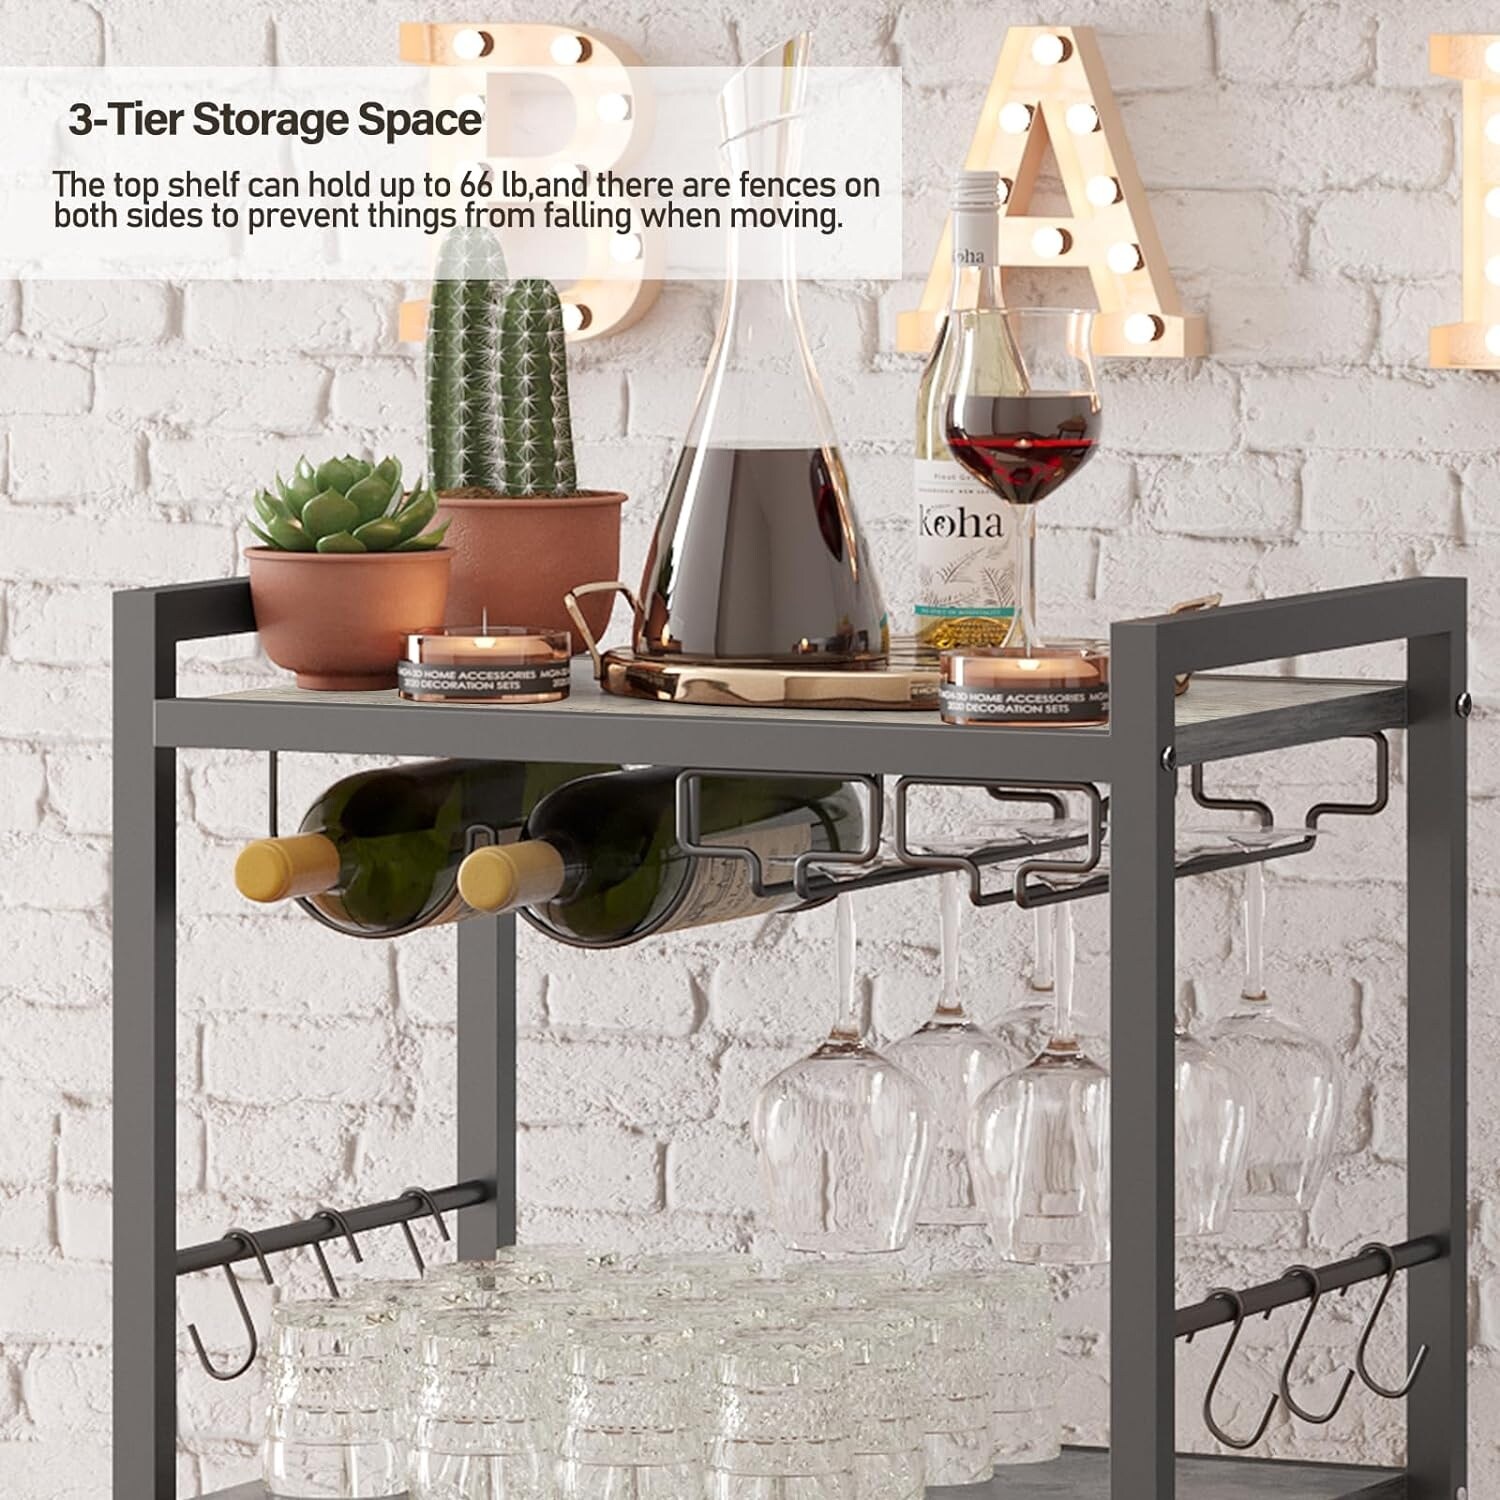 Mobile Kitchen Shelf with Wine Rack and Glass Holder